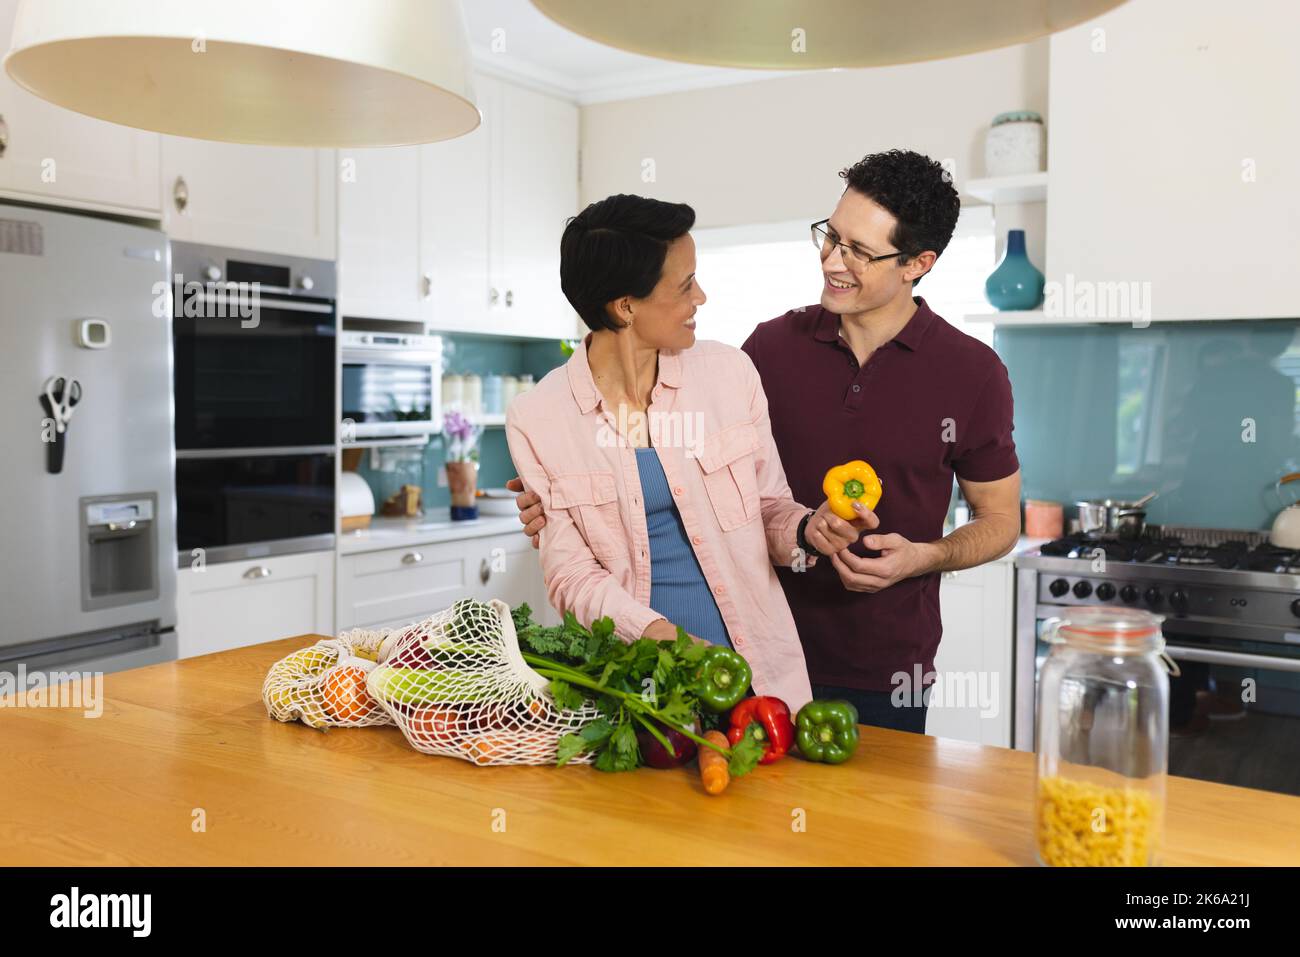 Happy diverse couple cooking dinner together, smiling and embracing in kitchen Stock Photo